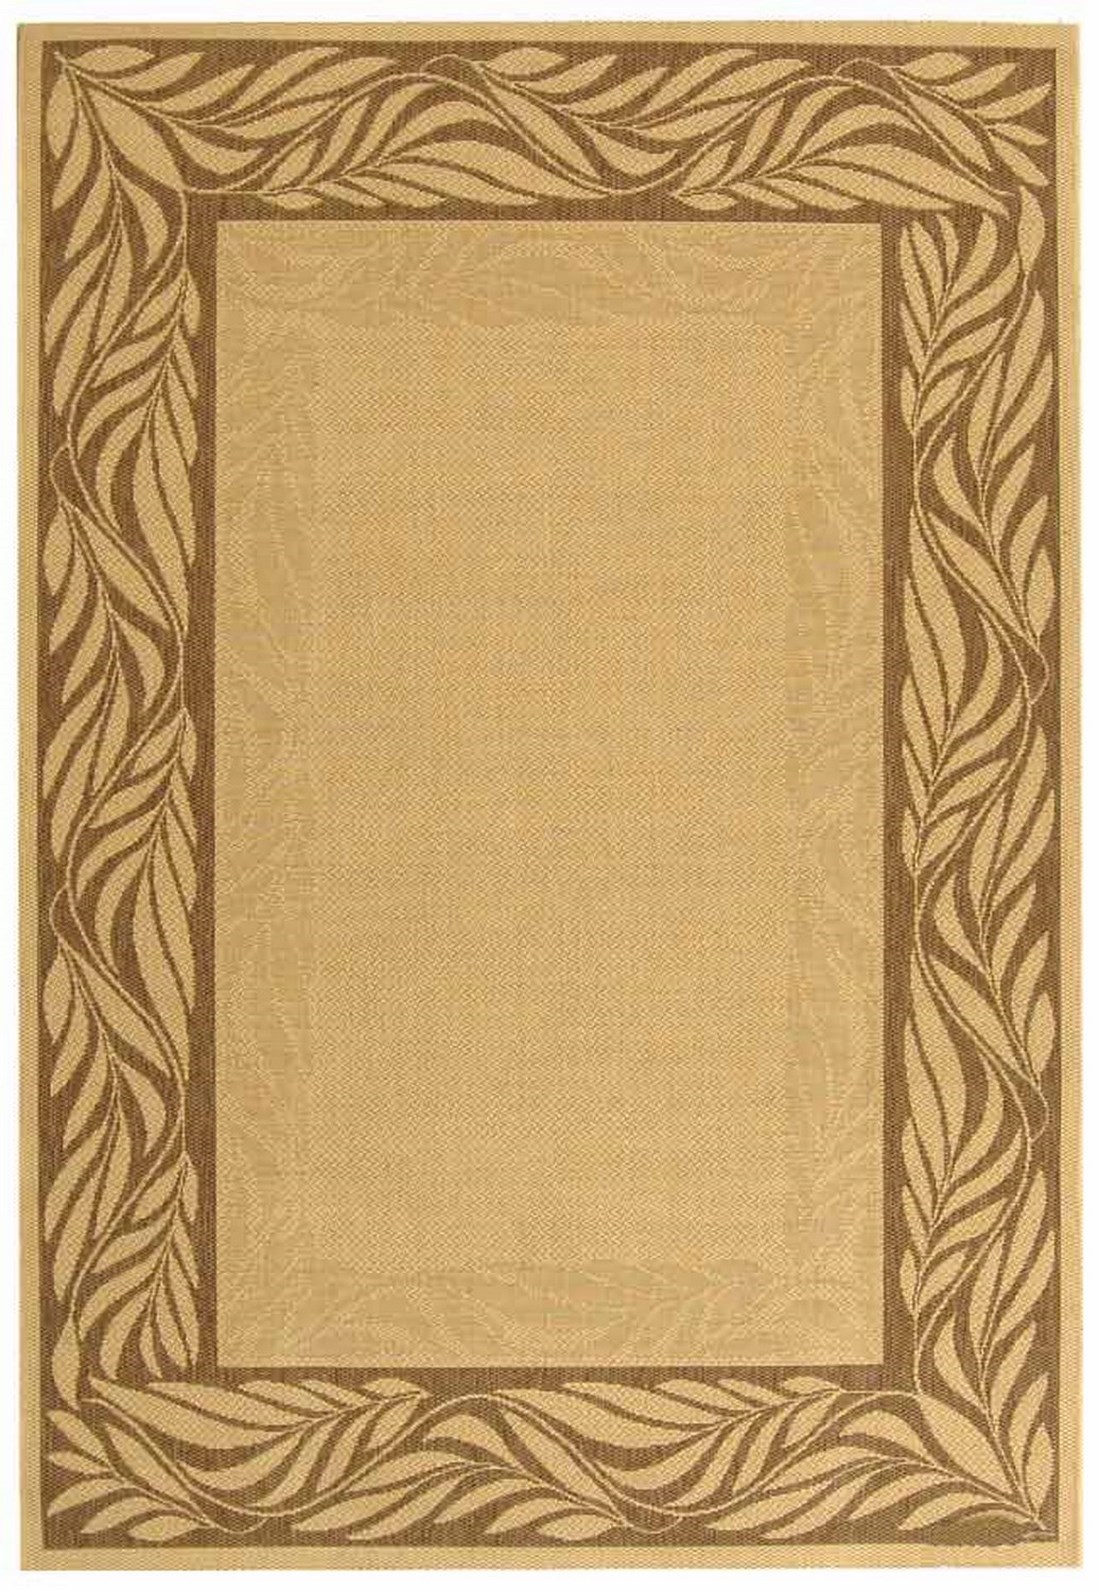 SAFAVIEH Courtyard Micah Traditional Floral Indoor/Outdoor Area Rug, 8' x 11', Natural/Brown - image 1 of 5